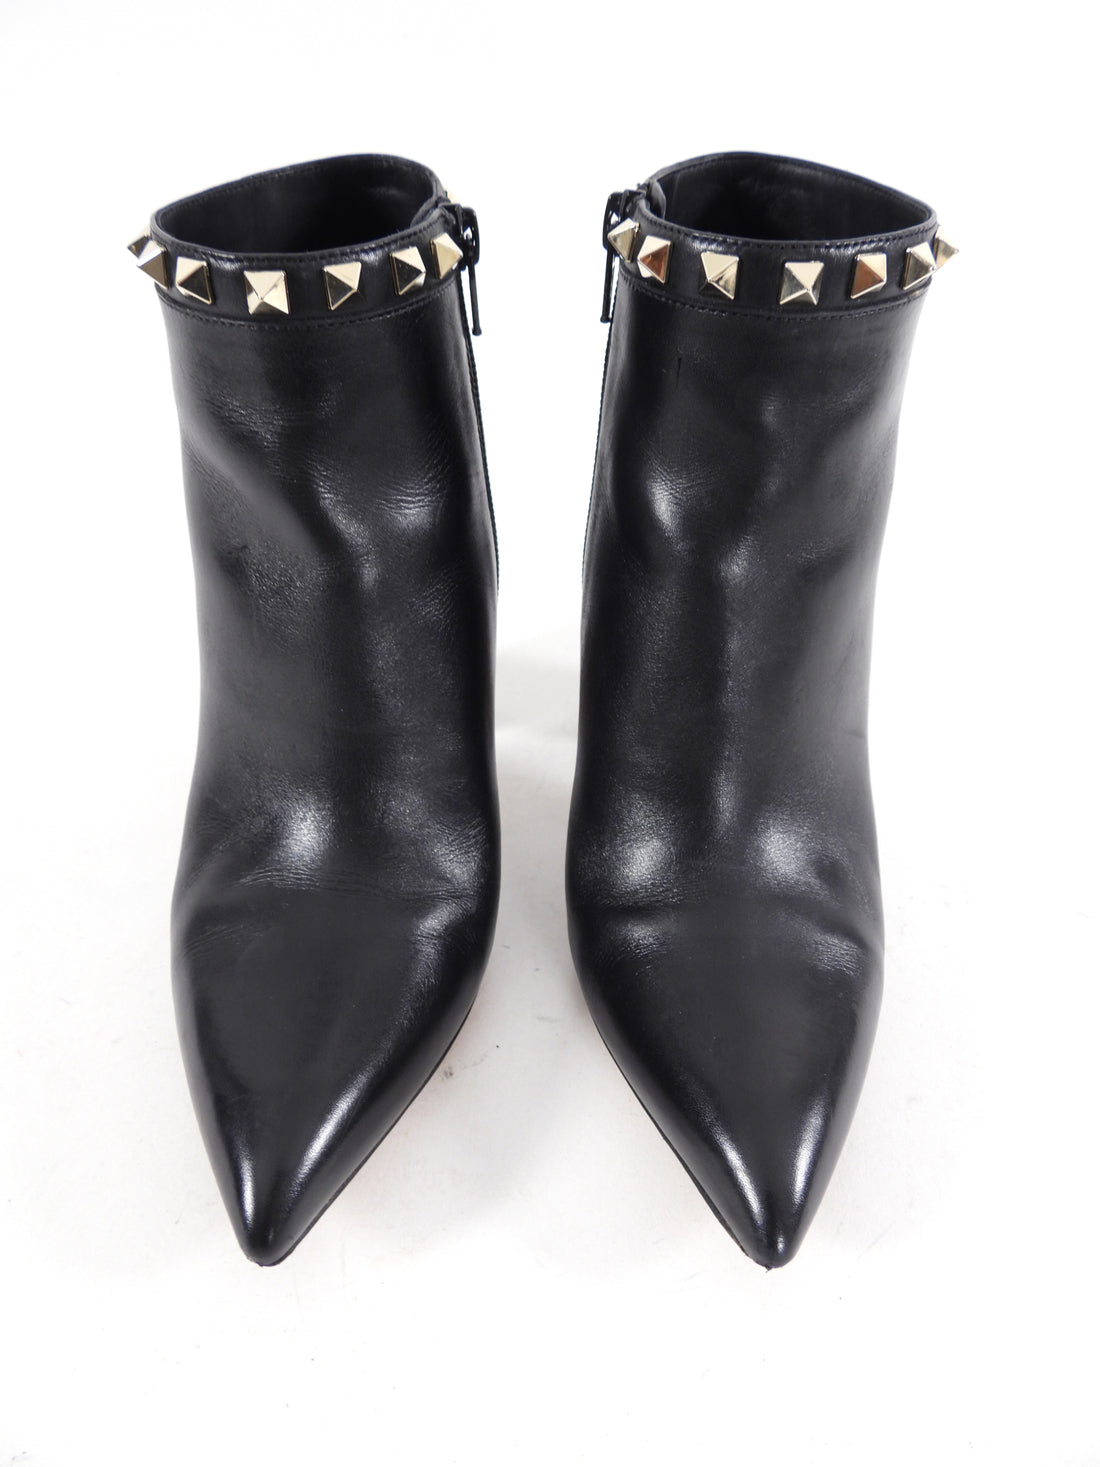 Valentino Black Leather Rock Stud Ankle Boots - 7.5